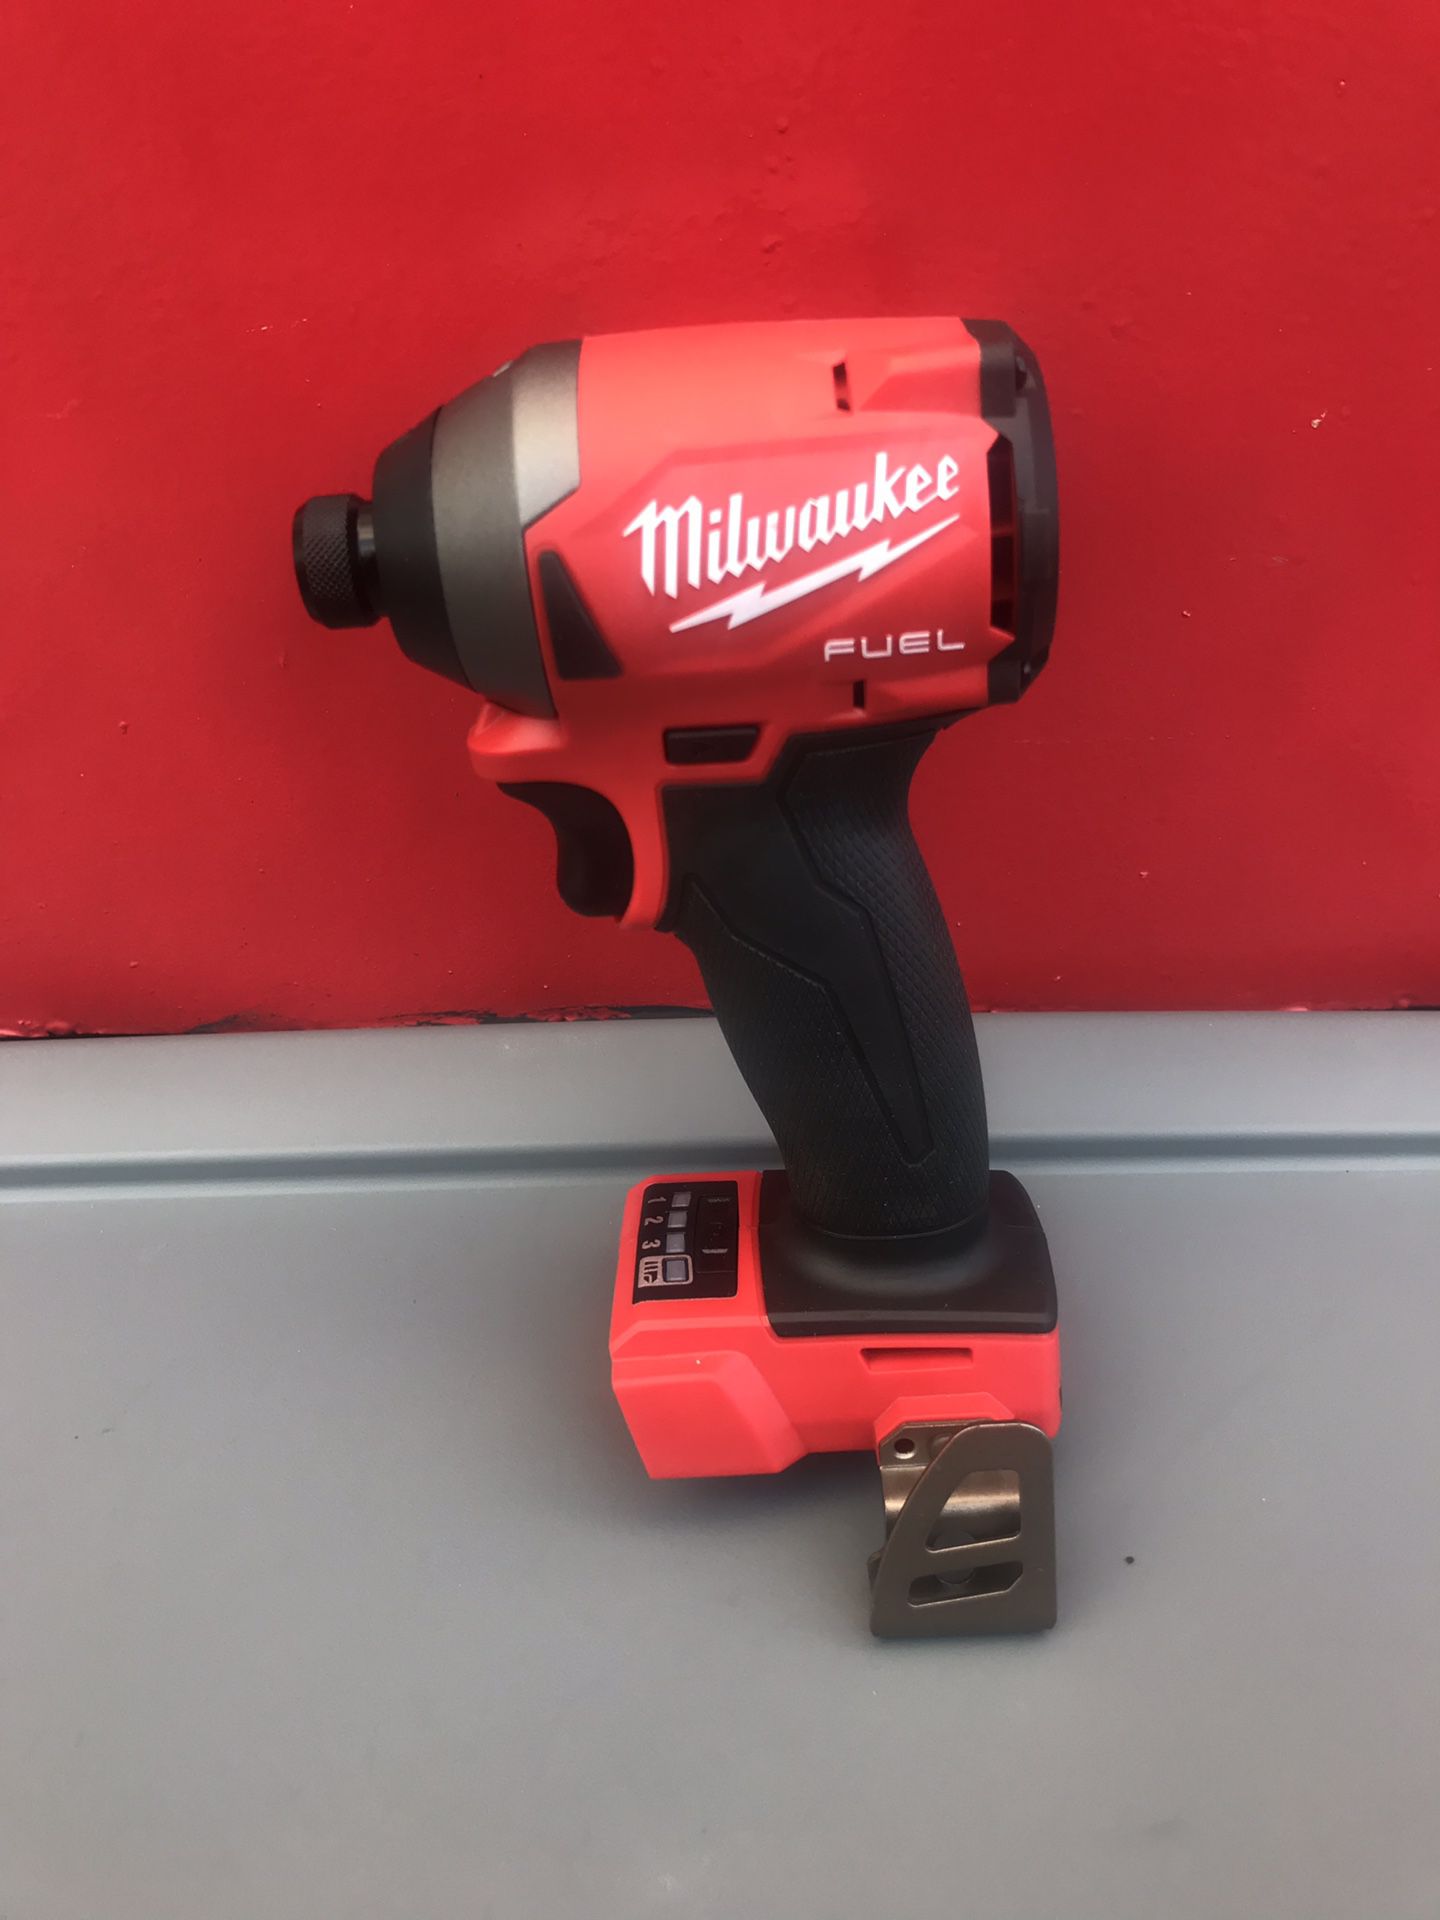 MILWAUKEE M18 FUEL LITHIUM ION CORDLESS BRUSHLESS 3-GENERATION 1/4 IN HEX IMPACT DRIVER COMPACT (TOOL ONLY)